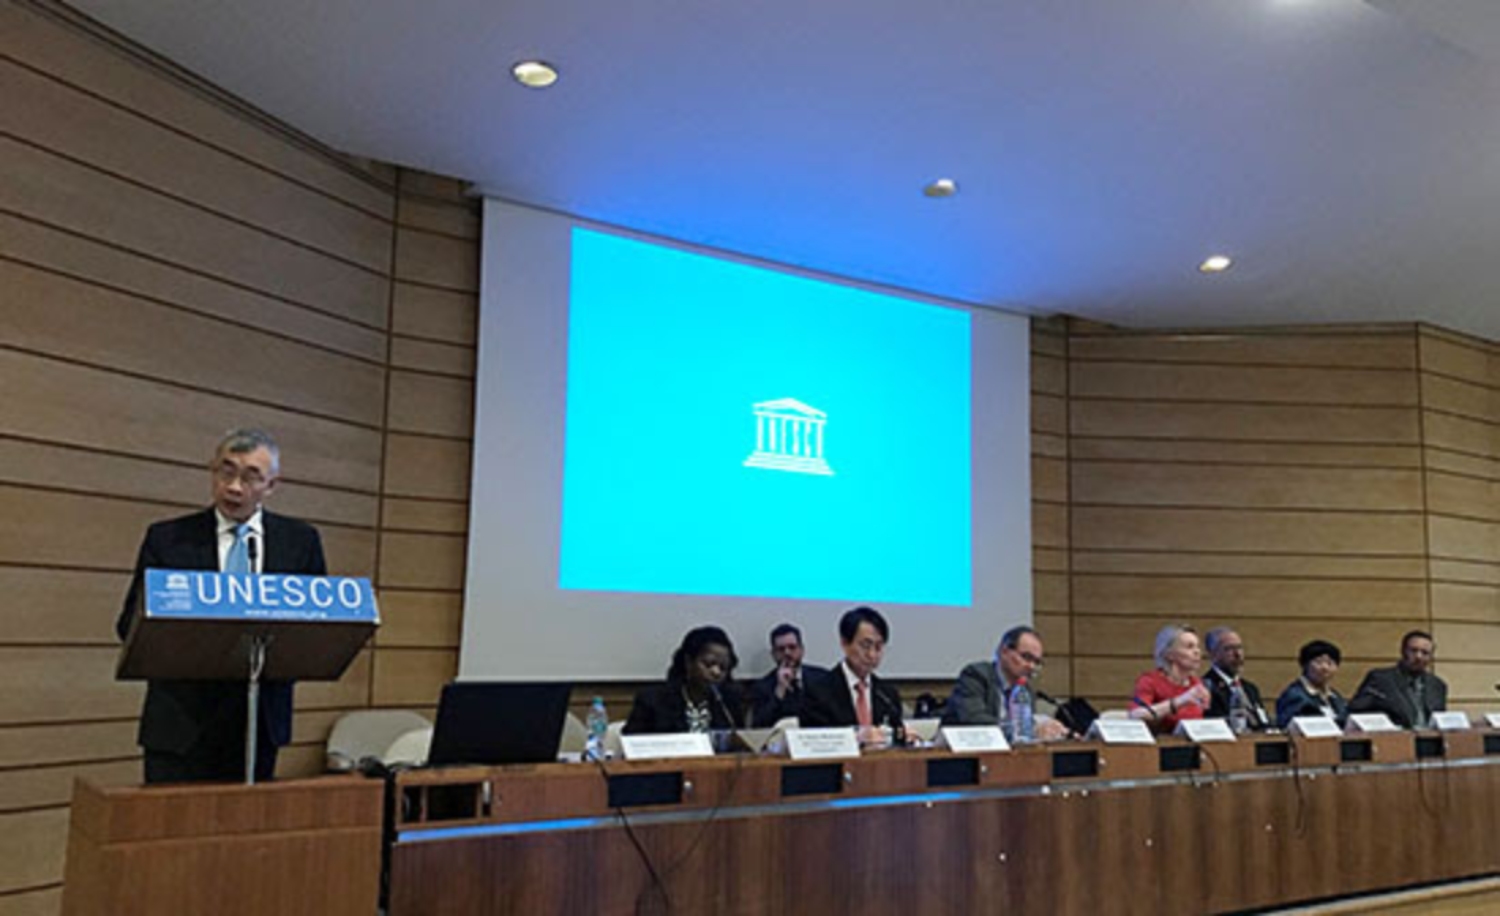 Mr Xiang Qu, UNESCO Deputy Director General with the members of the IGCP Council